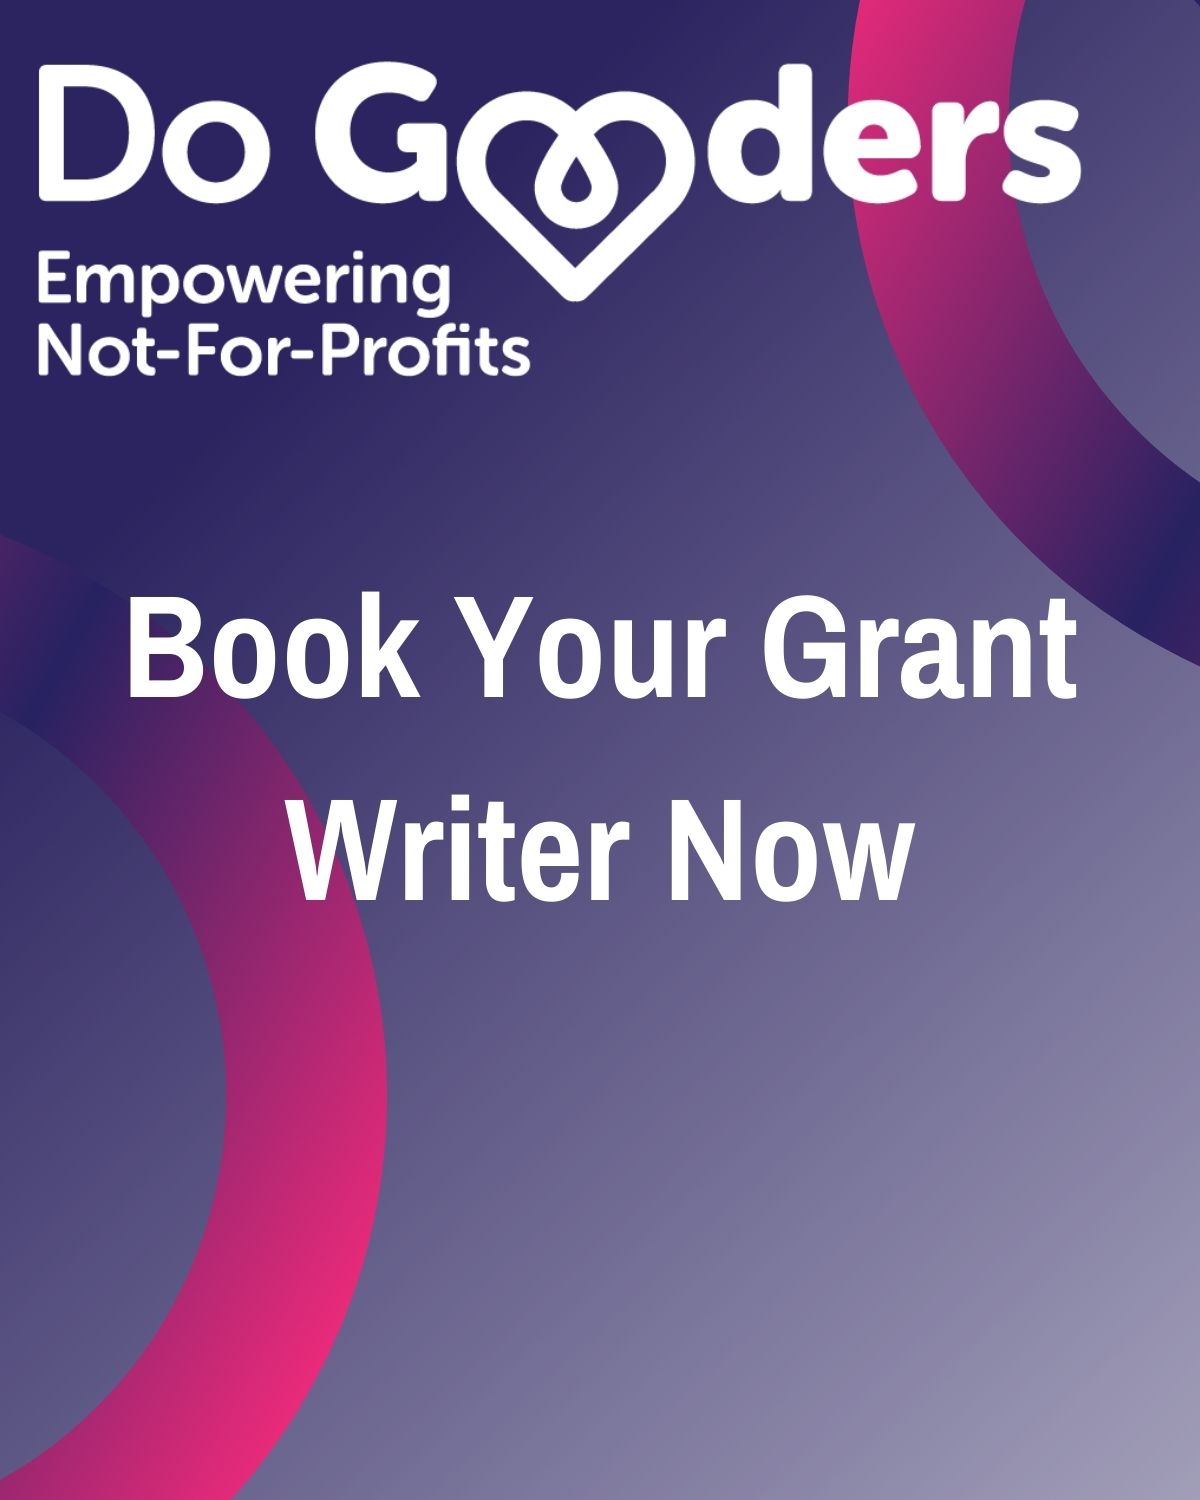 Book Your Grant Writer